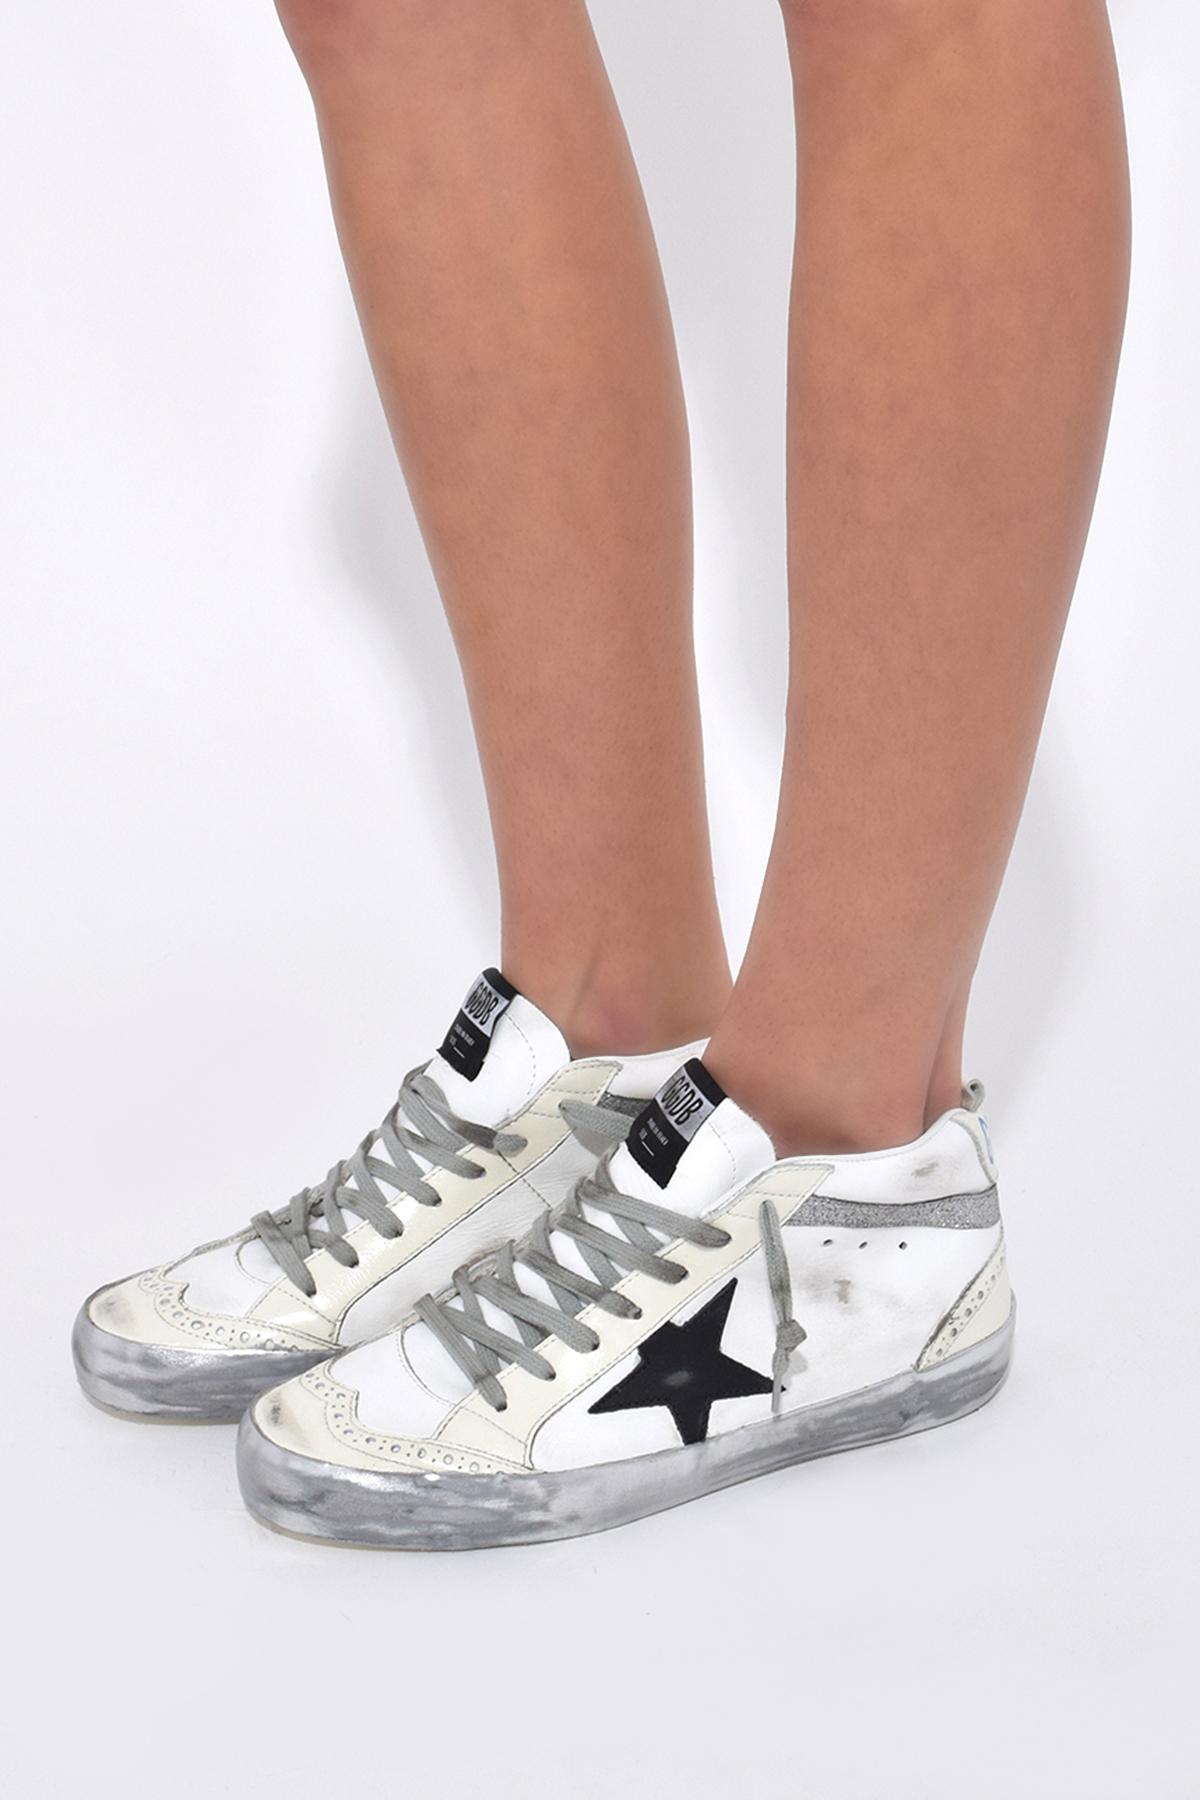 Golden Goose Deluxe Brand Leather Mid Star Sneakers In Sparkle/white ...